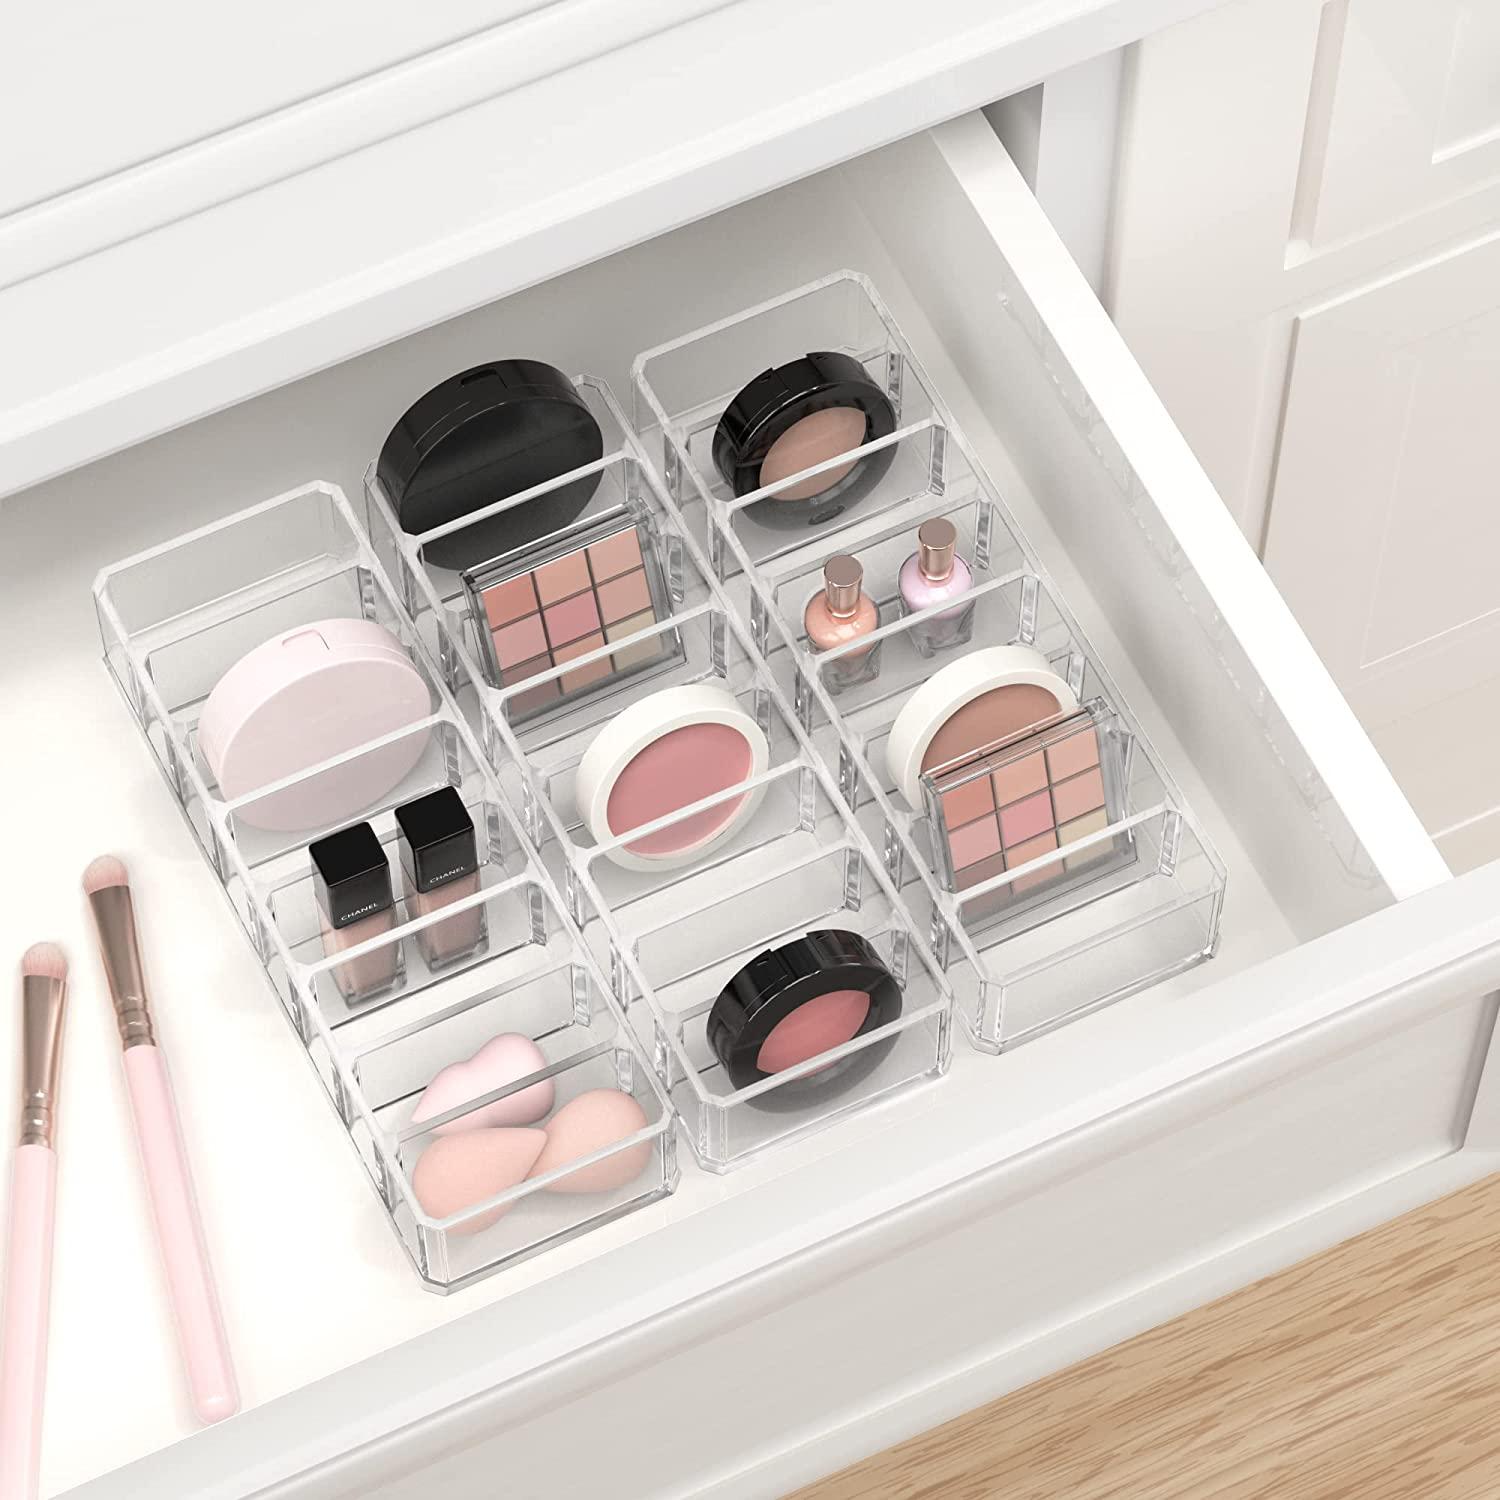 HBlife Clear Acrylic Makeup Compact Organizer, 8 Spaces Vanity Organizer  Stand Eyeshadow Pallet Storage for Lipstick Bronzer Powder Highlighter,  Skincare Cosmetic Display Cases for Bathroom